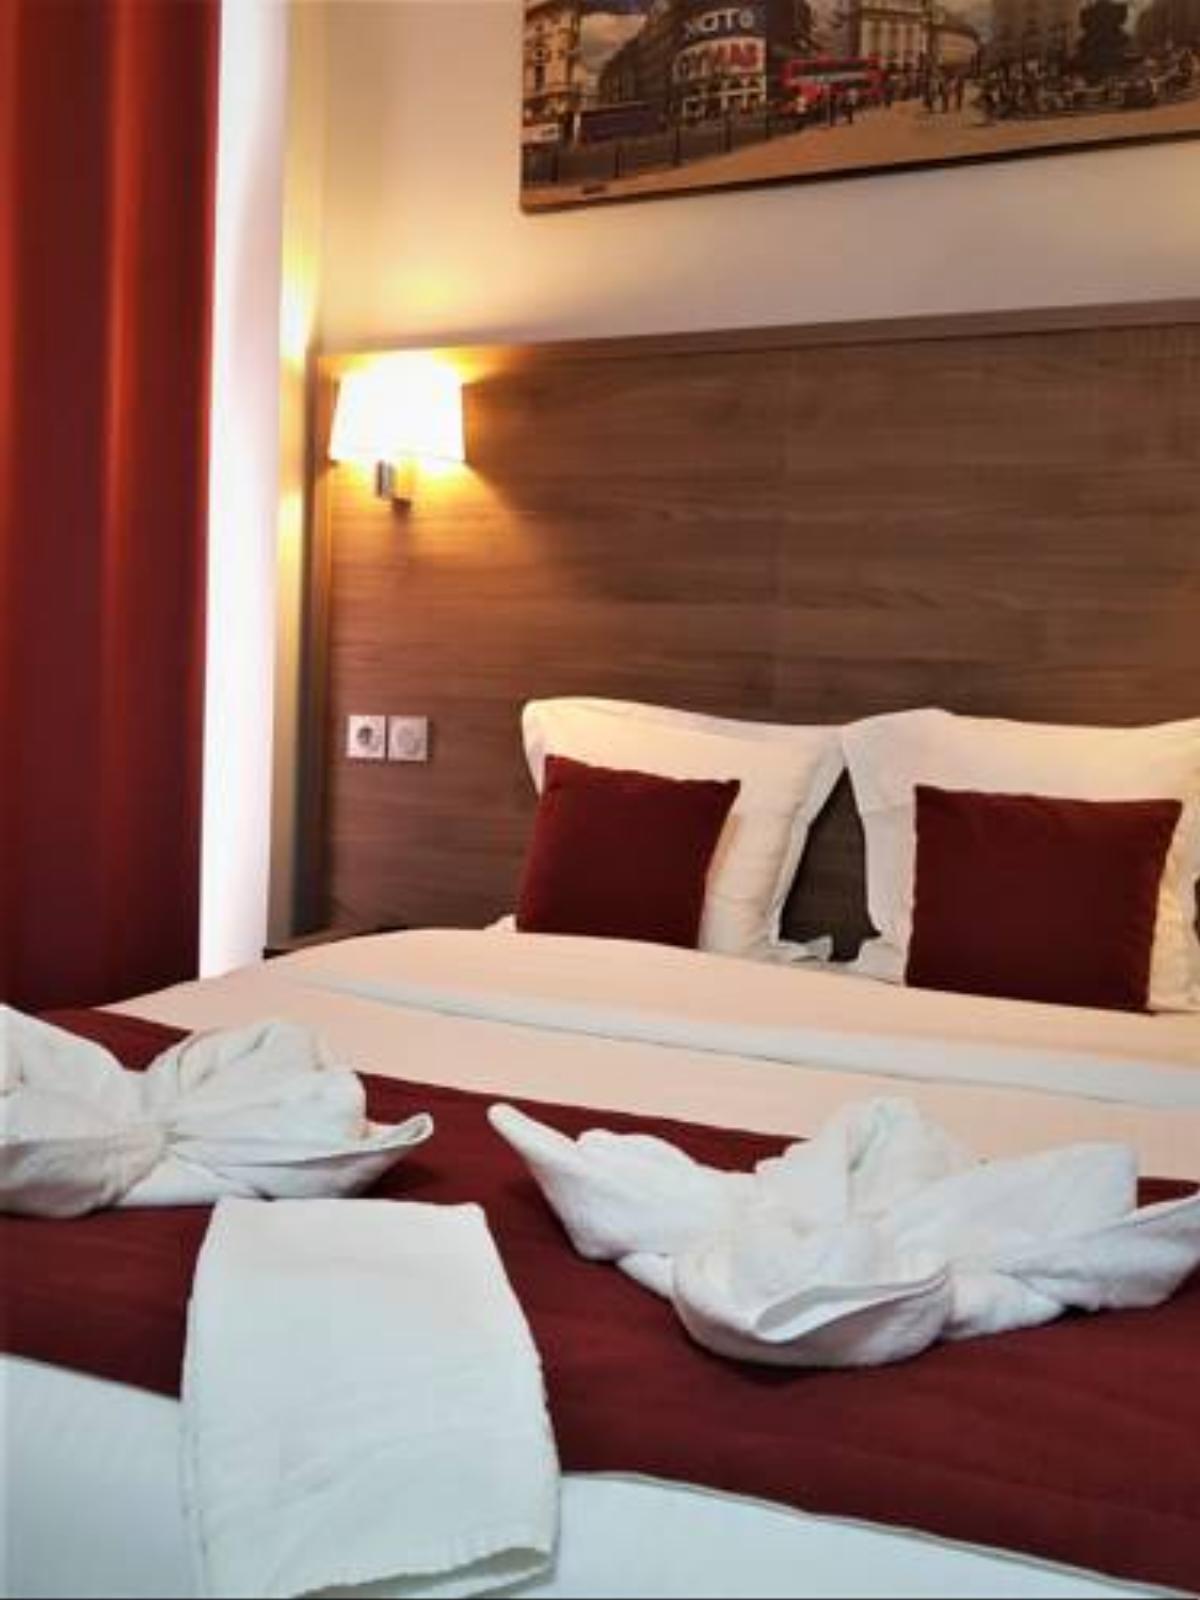 Hotel Luxor Hotel Issy-les-Moulineaux France